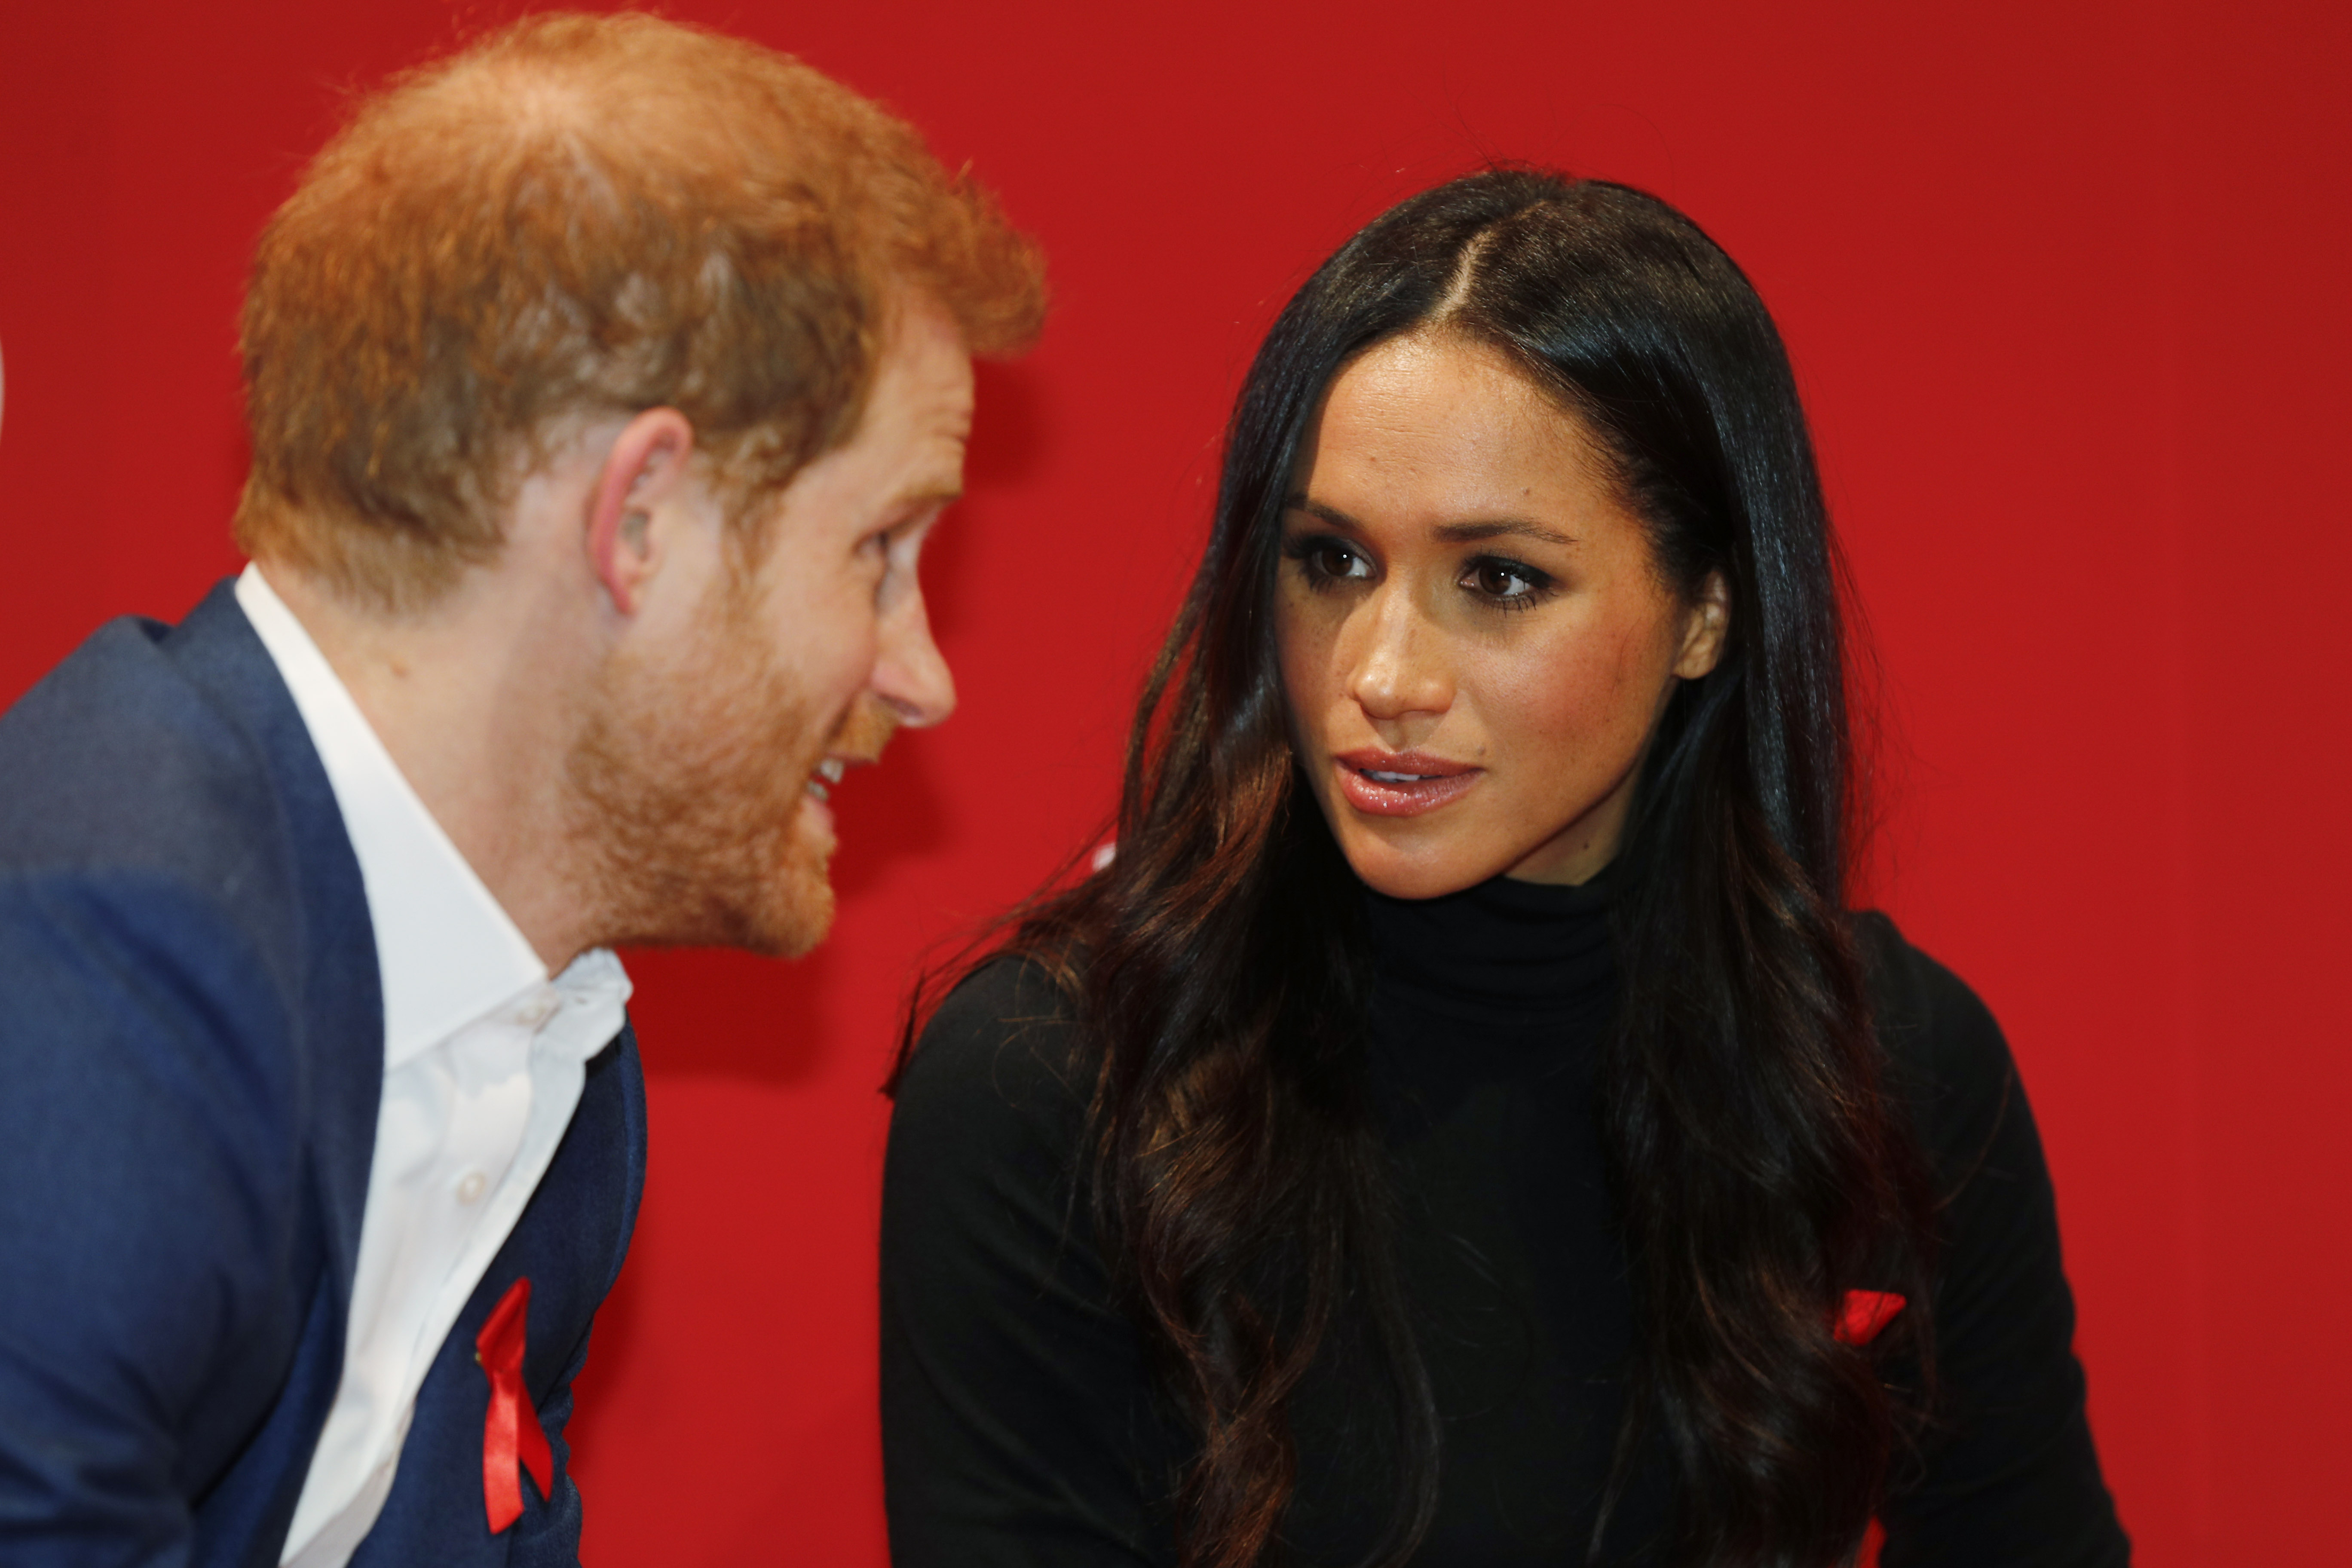 Prince Harry and Meghan Markle visit the Terrence Higgins Trust World AIDS Day charity fair at Nottingham Contemporary on December 1, 2017 in Nottingham, England. | Source: Getty Images